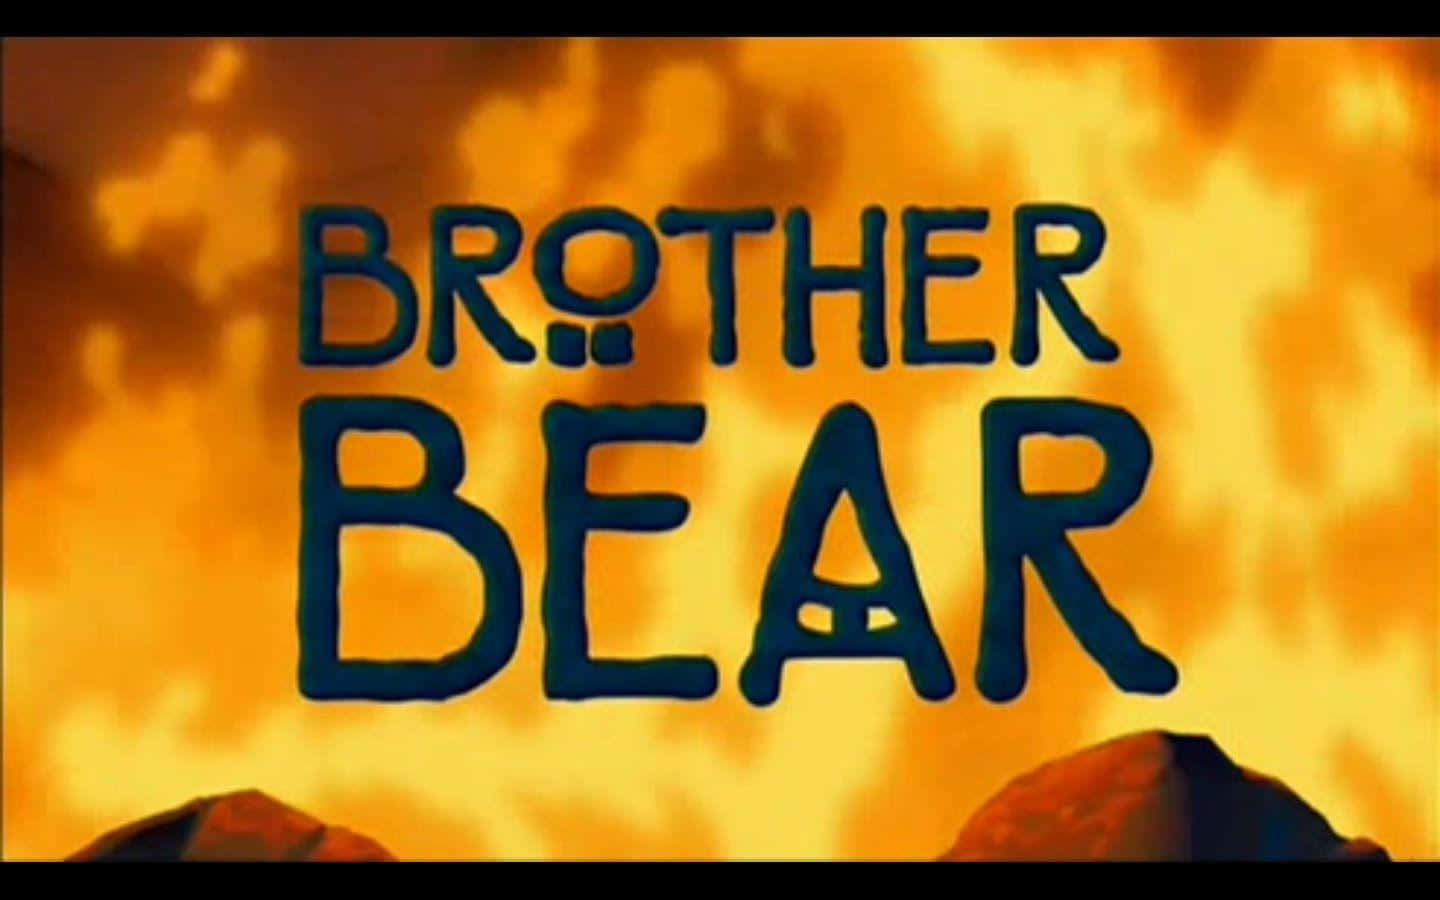 Brother Bear comes to life!